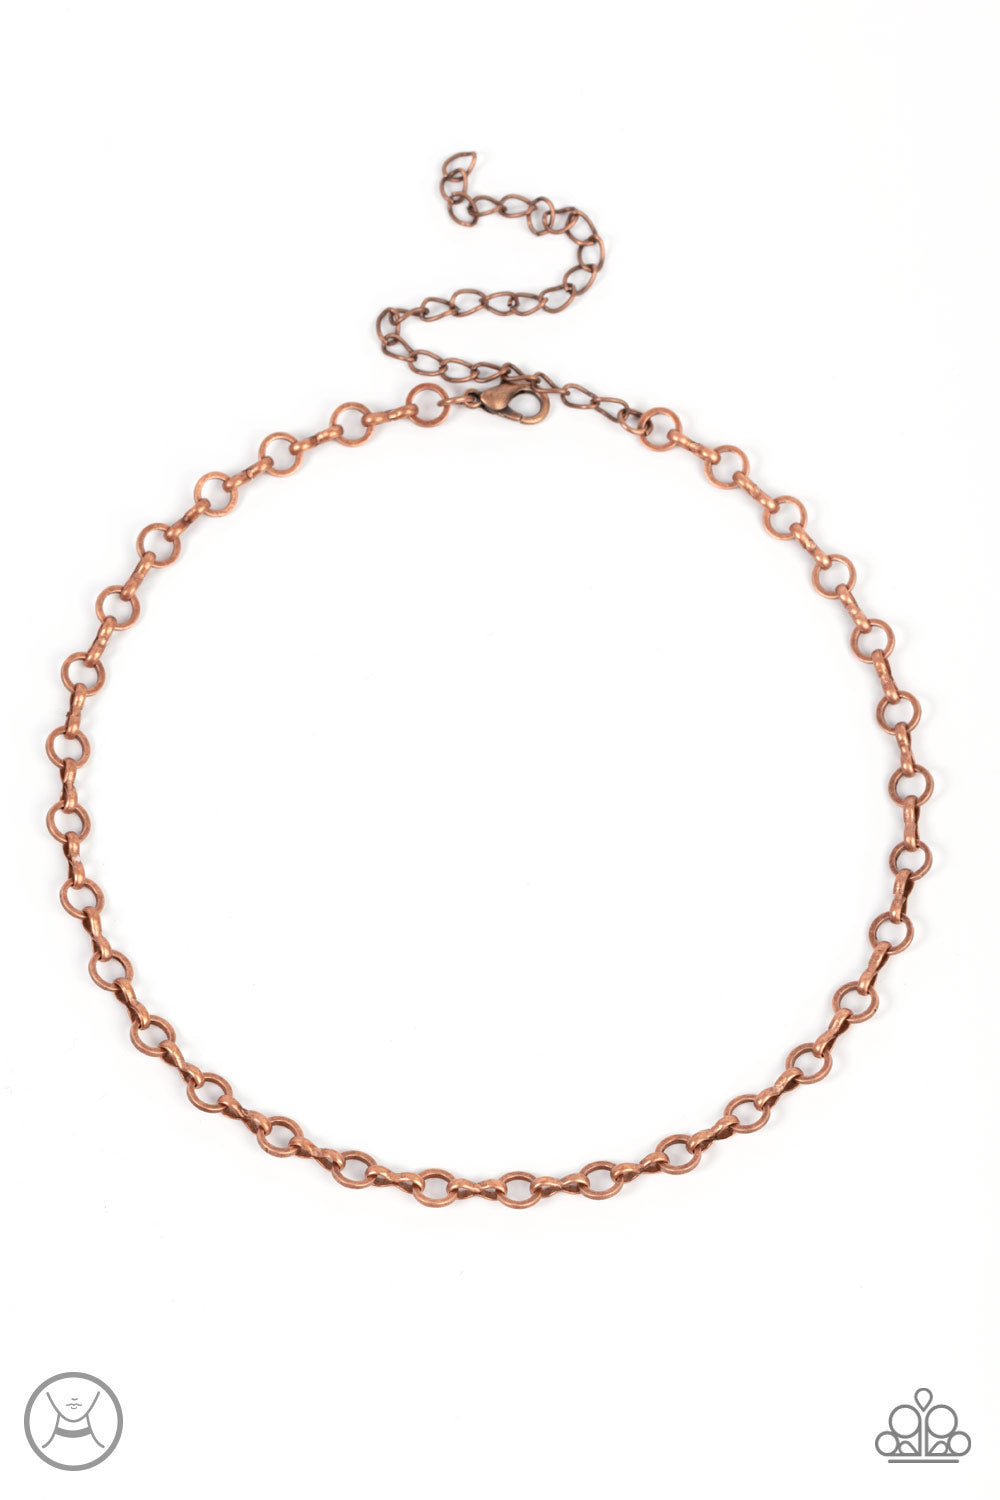 five-dollar-jewelry-keepin-it-chic-copper-necklace-paparazzi-accessories